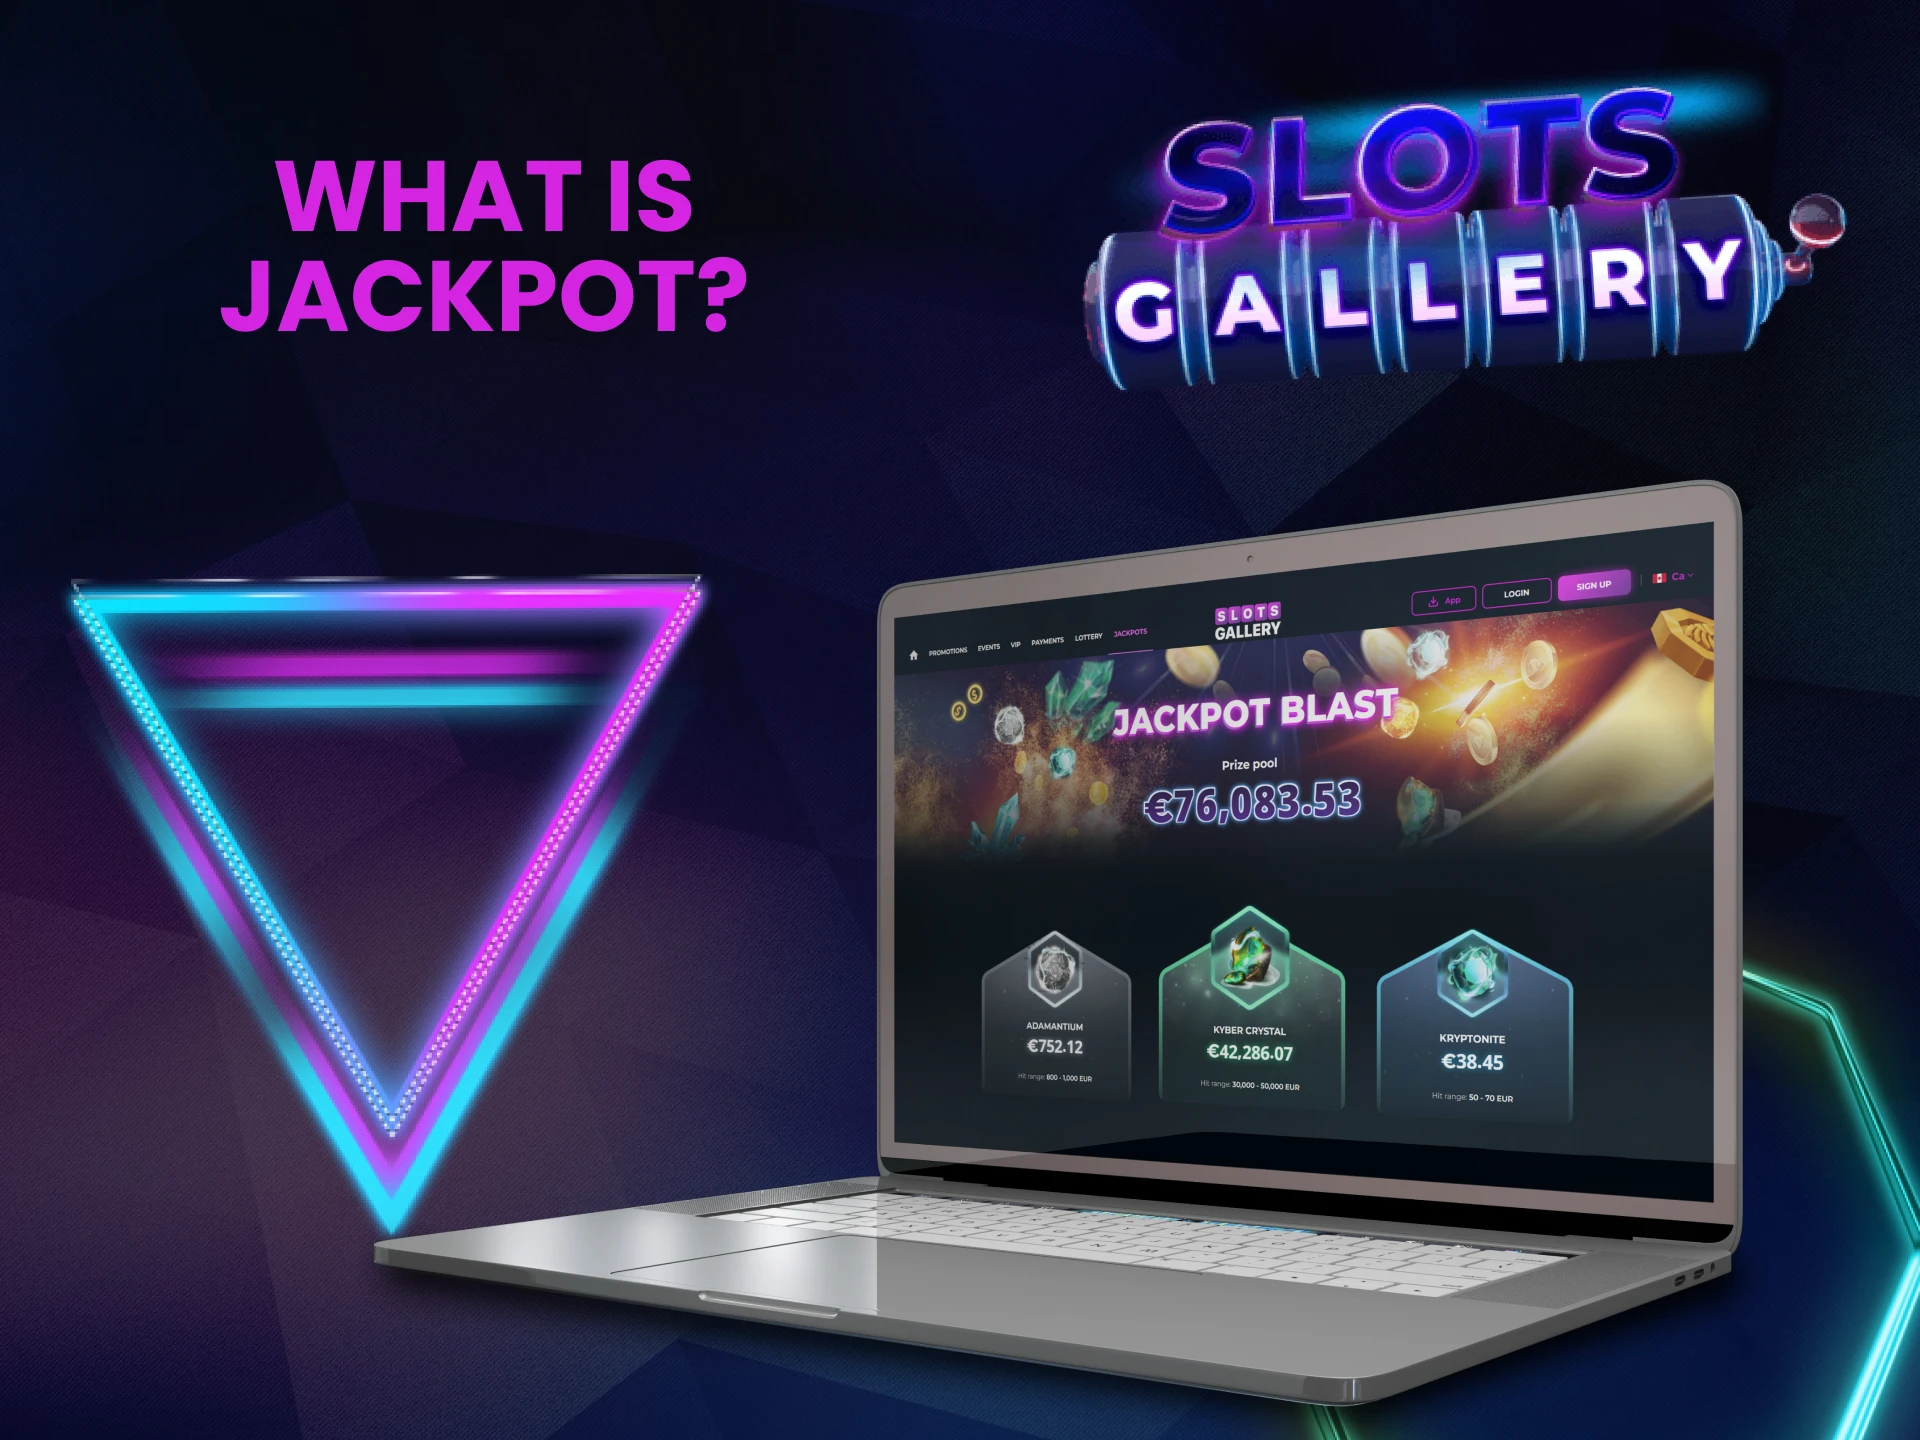 We will tell you what a jackpot is at Slots Gallery.